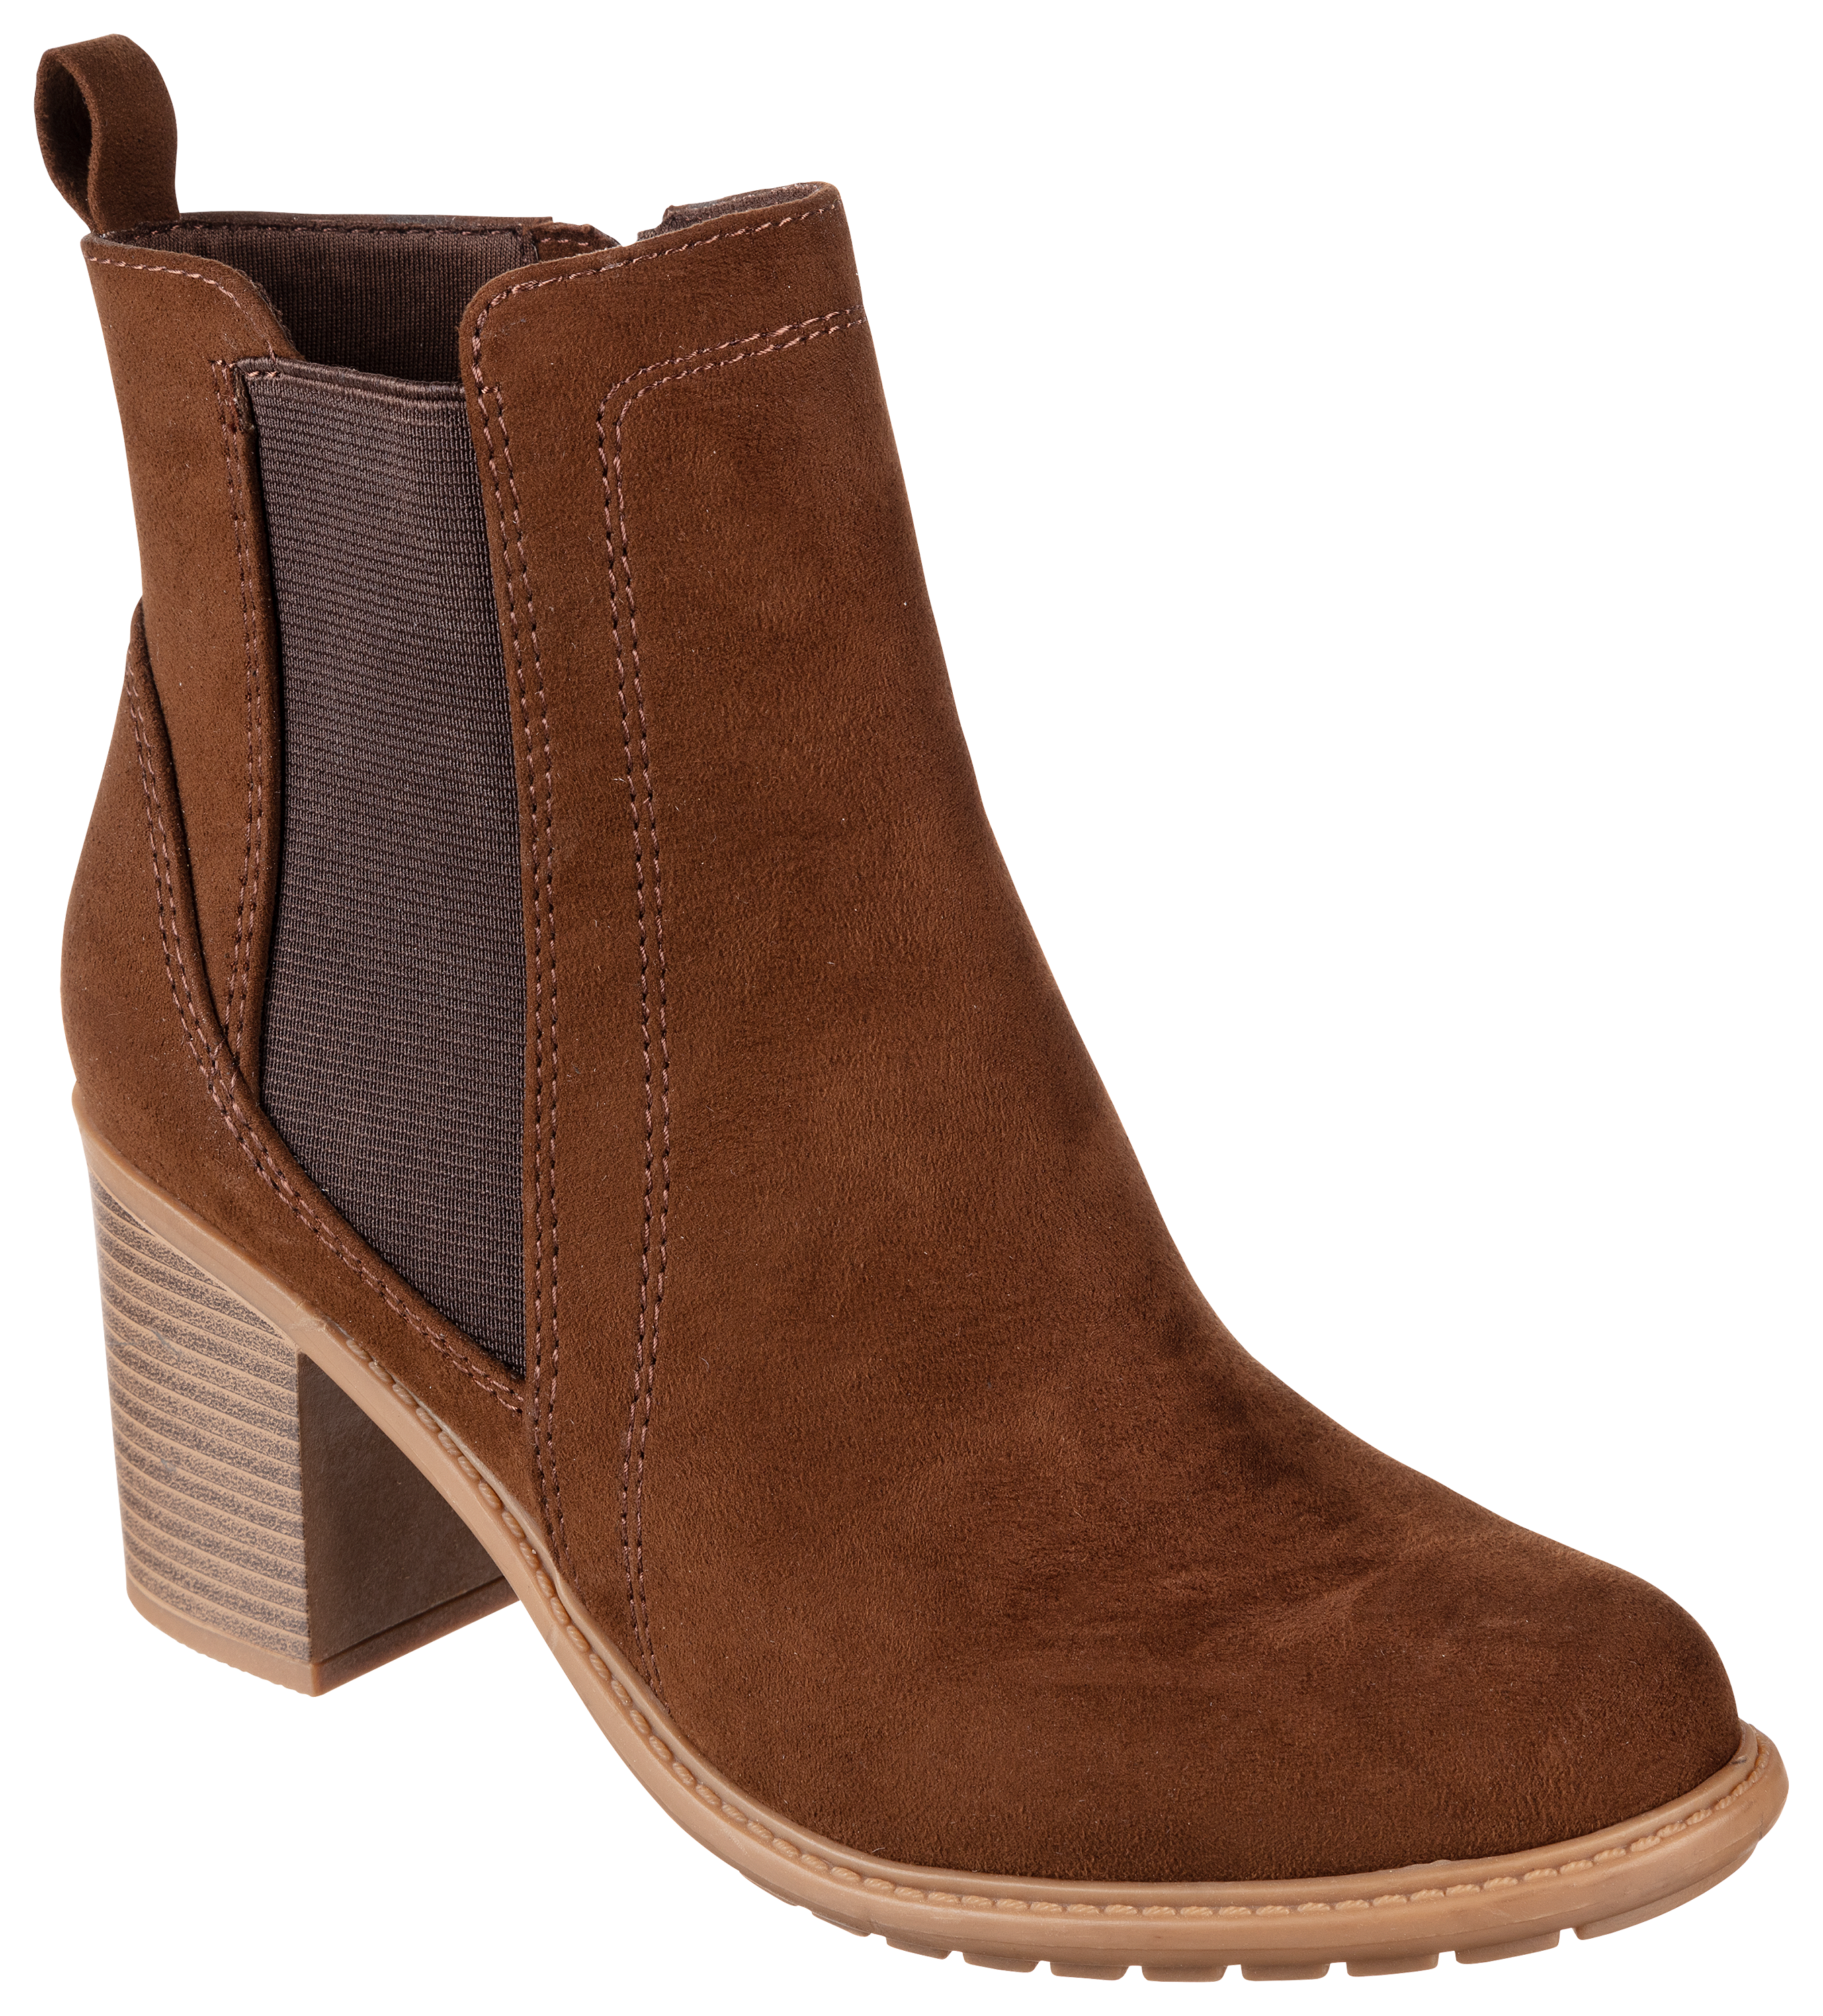 Natural Reflections Natalie II Boots for Ladies - Brown - 7M